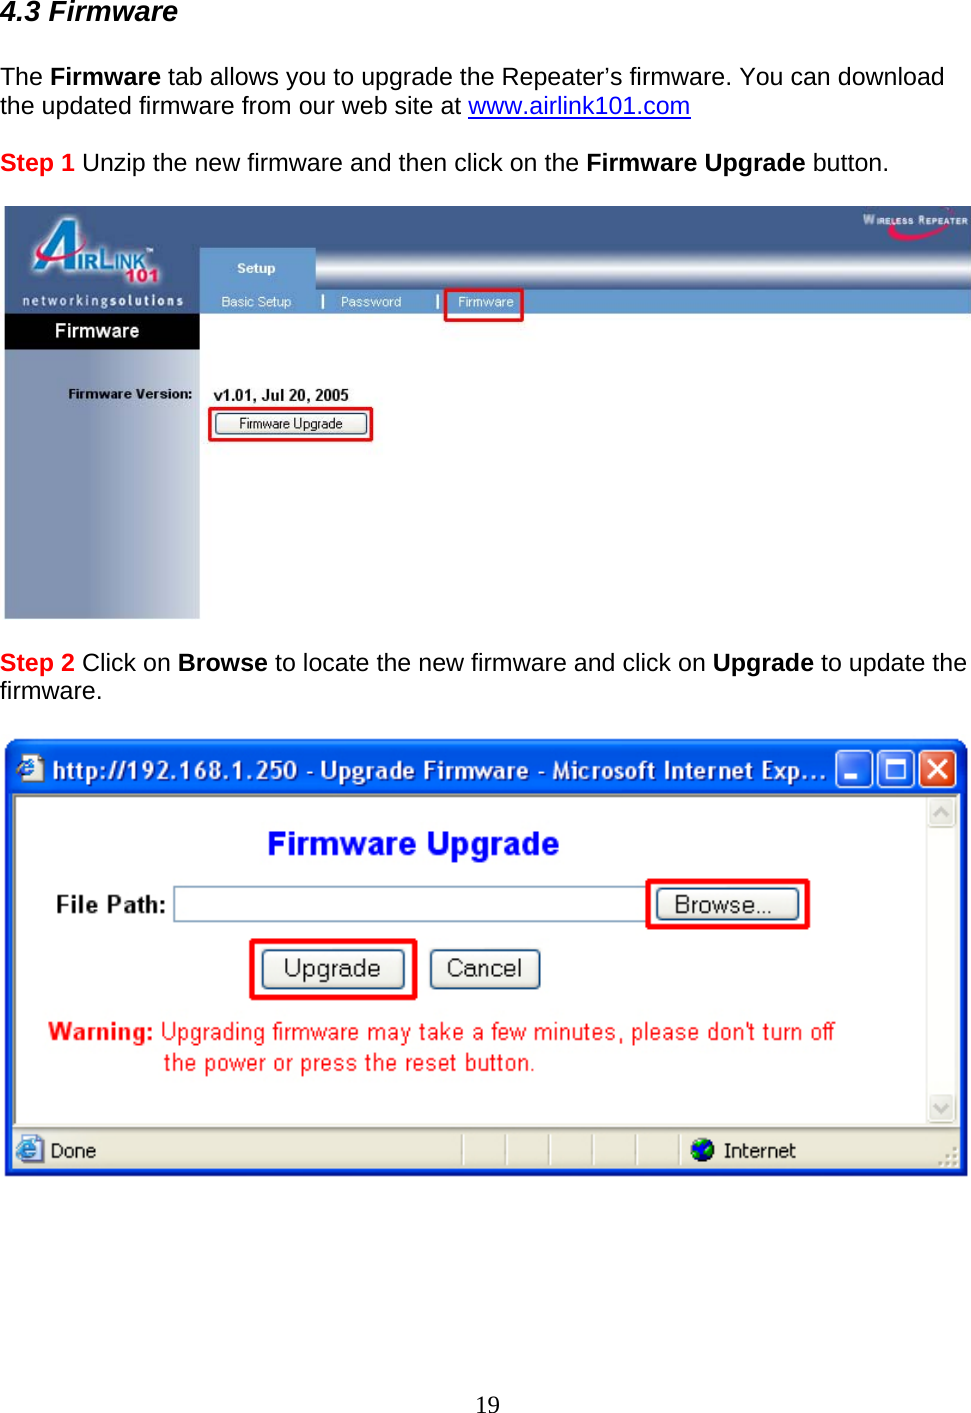 19 4.3 Firmware  The Firmware tab allows you to upgrade the Repeater’s firmware. You can download the updated firmware from our web site at www.airlink101.com  Step 1 Unzip the new firmware and then click on the Firmware Upgrade button.    Step 2 Click on Browse to locate the new firmware and click on Upgrade to update the firmware.        